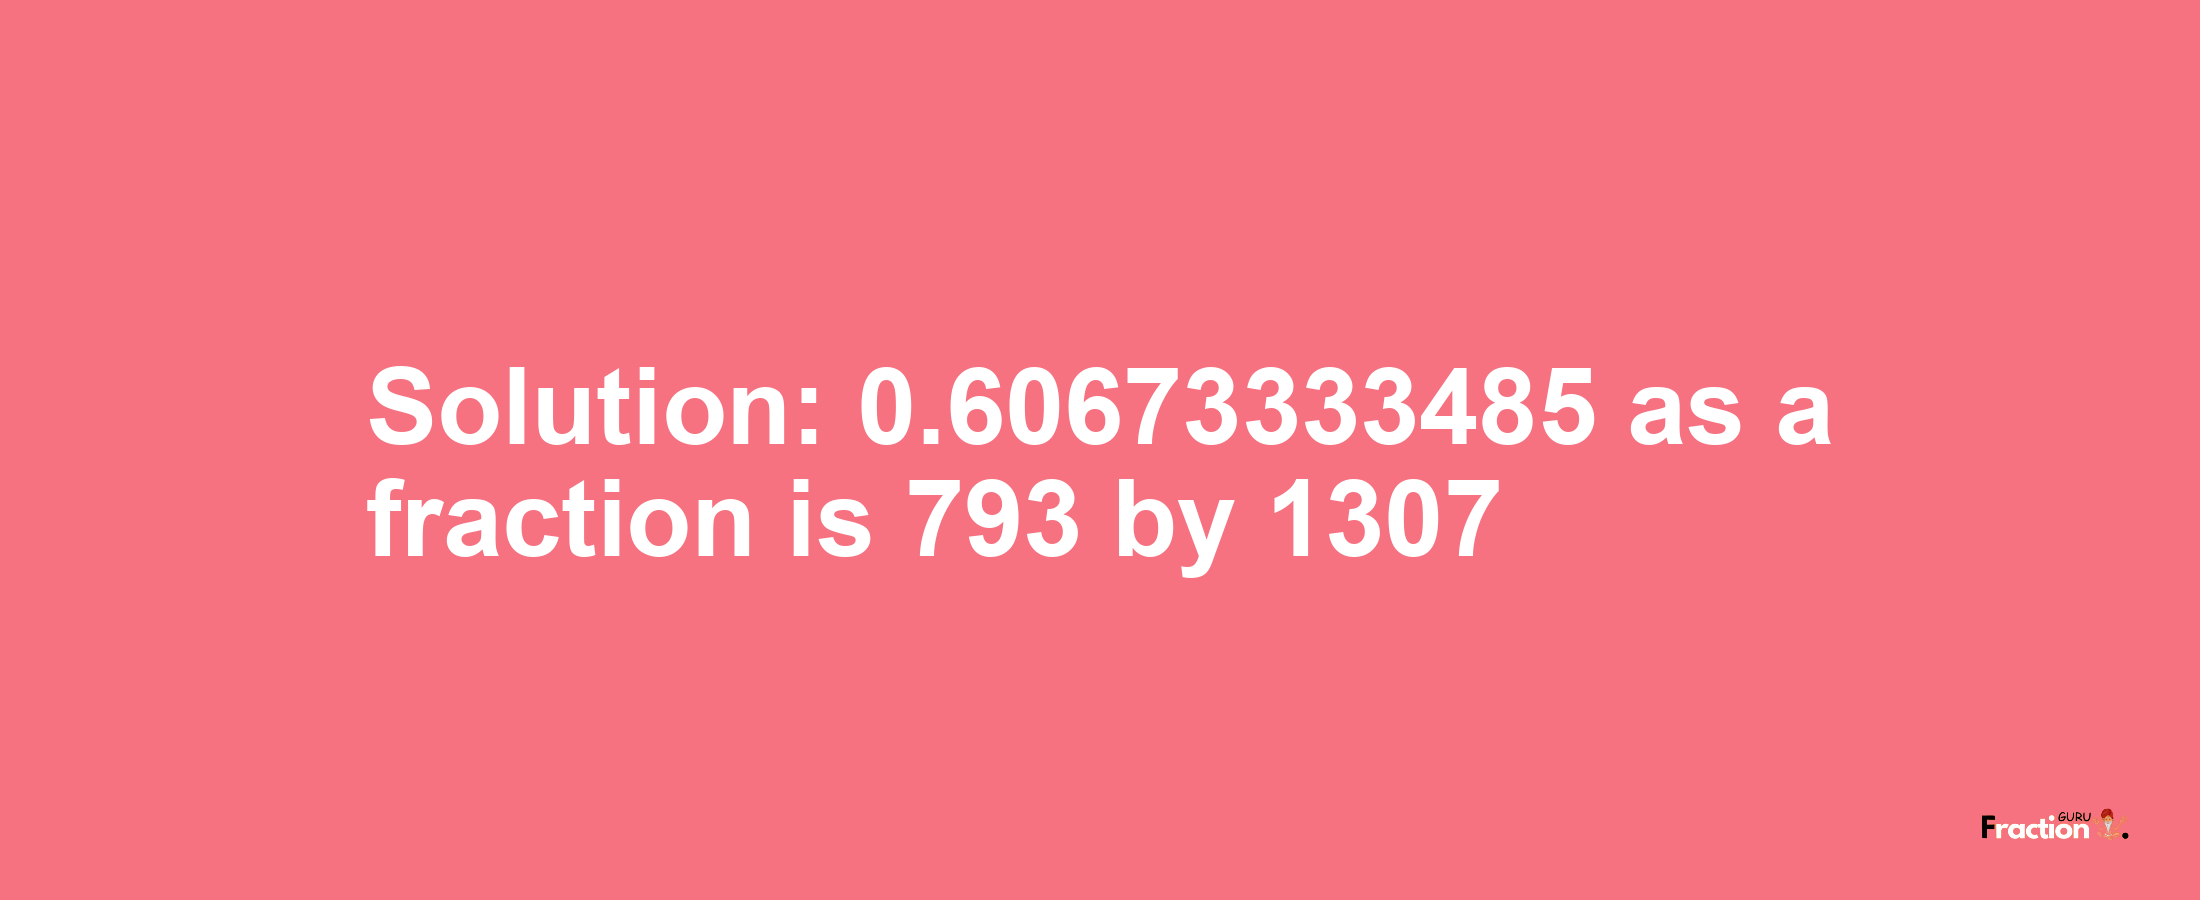 Solution:0.60673333485 as a fraction is 793/1307